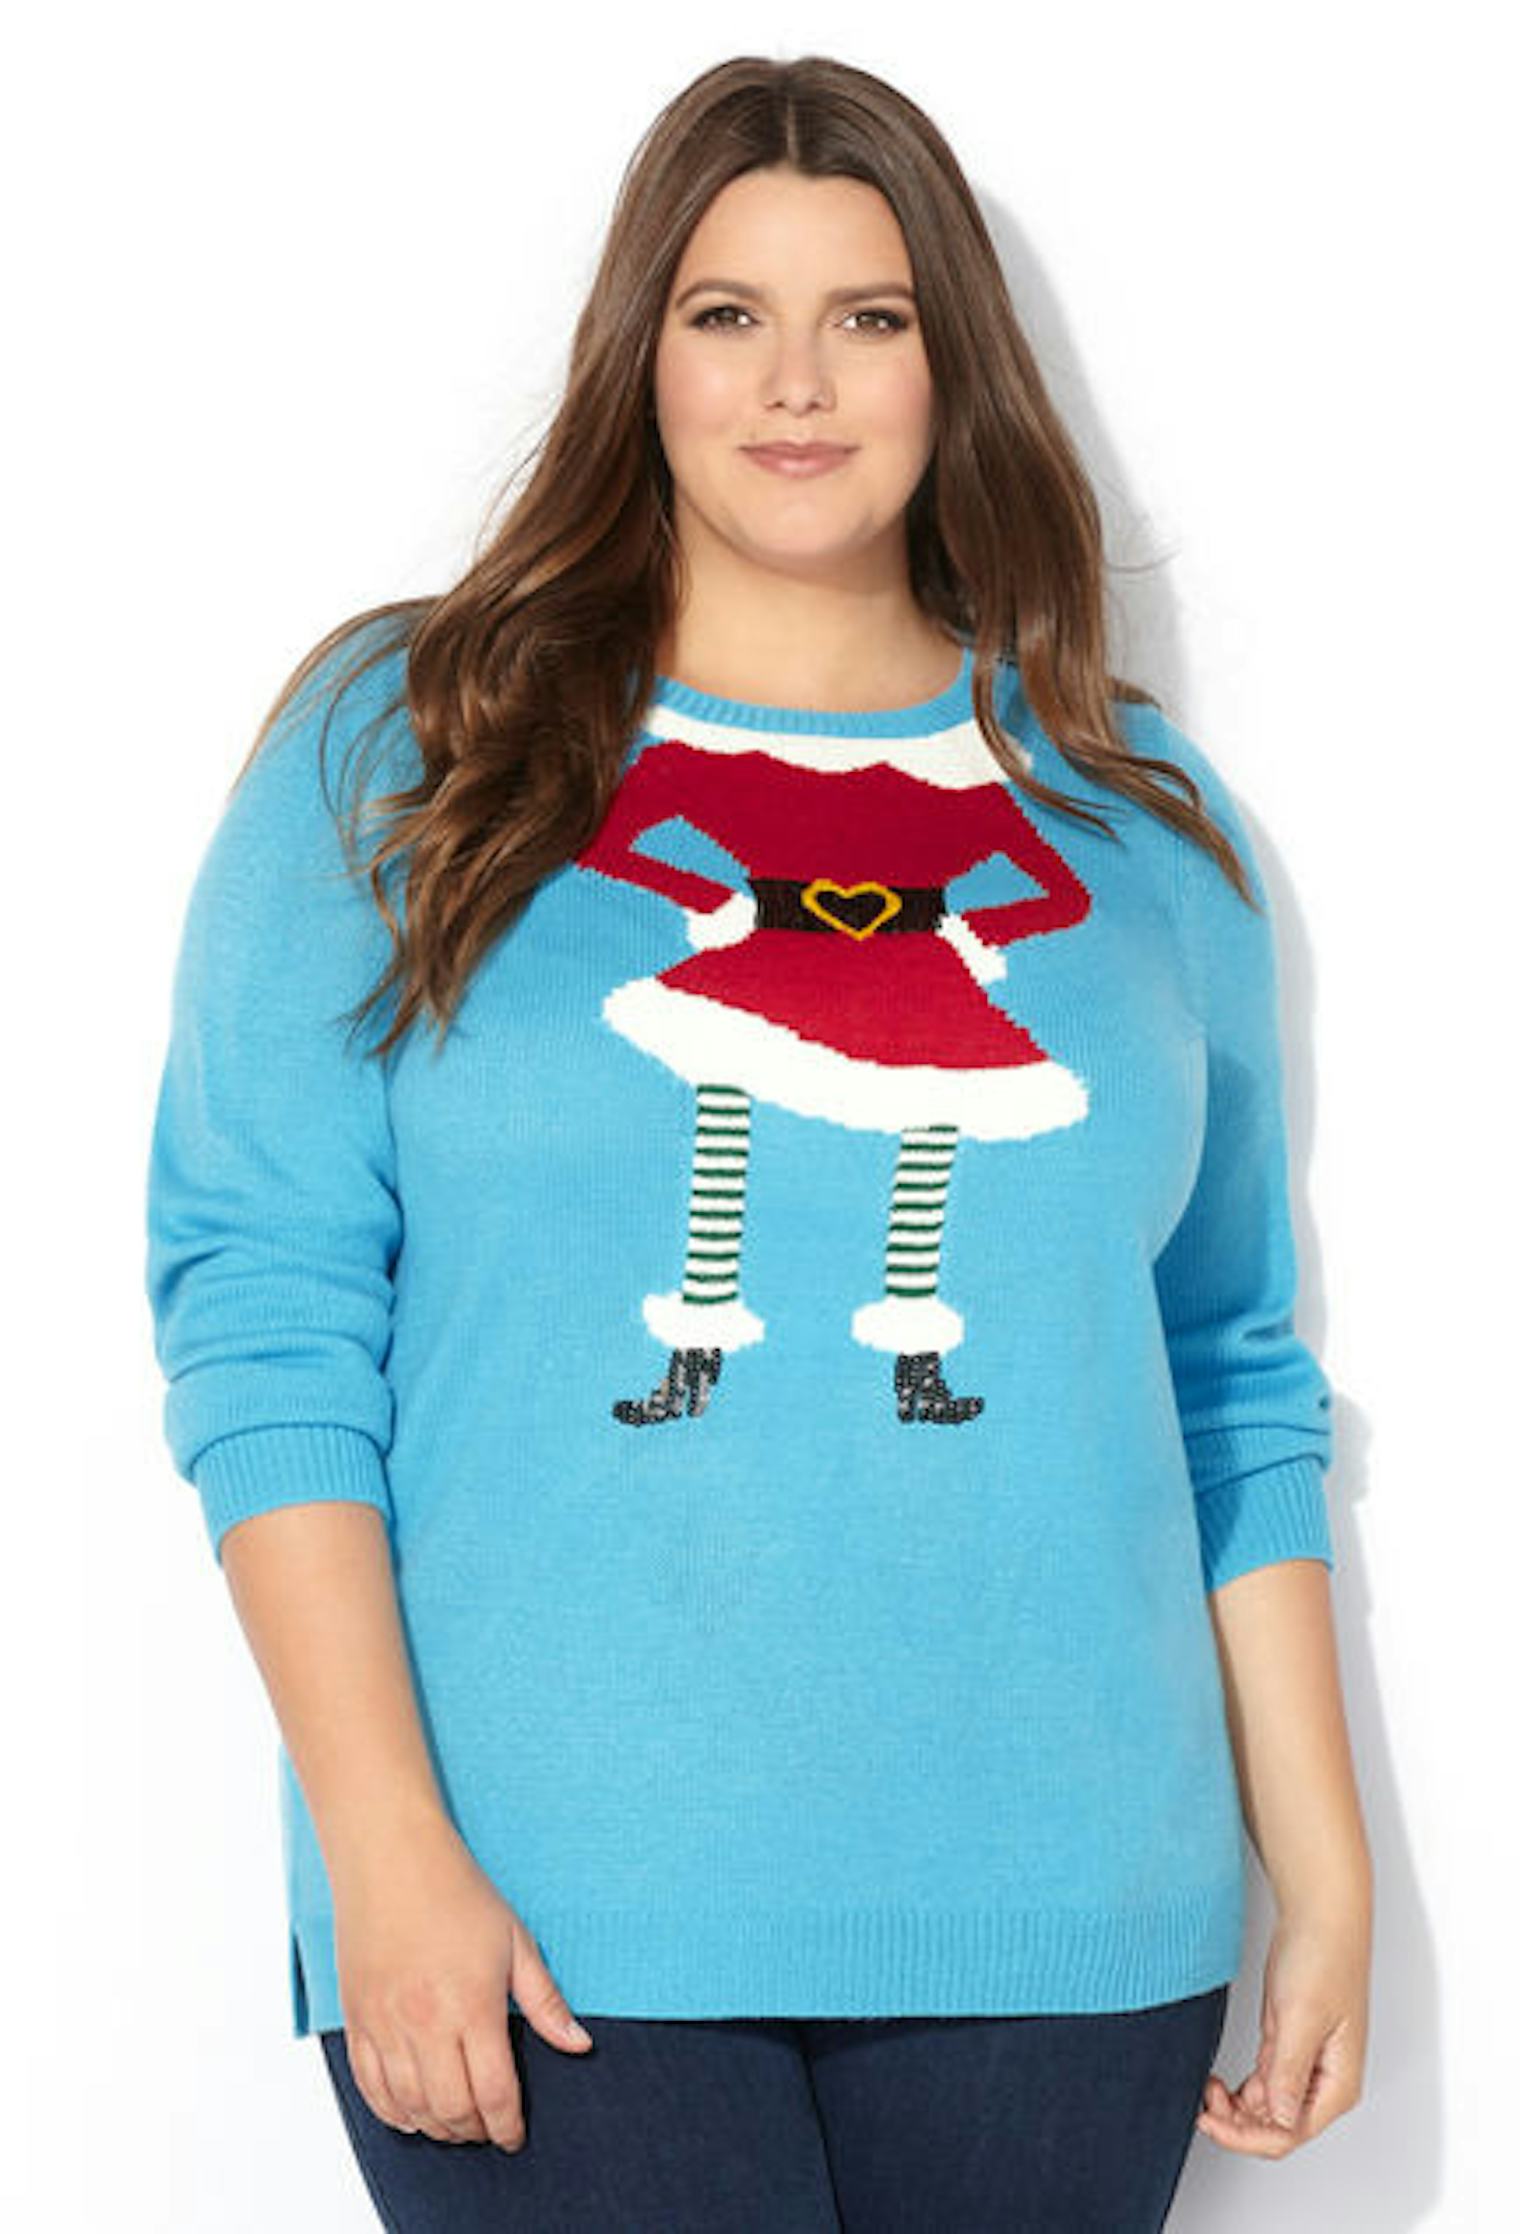 17 Plus Size Ugly Christmas Sweaters That Are Hideously Perfect — PHOTOS